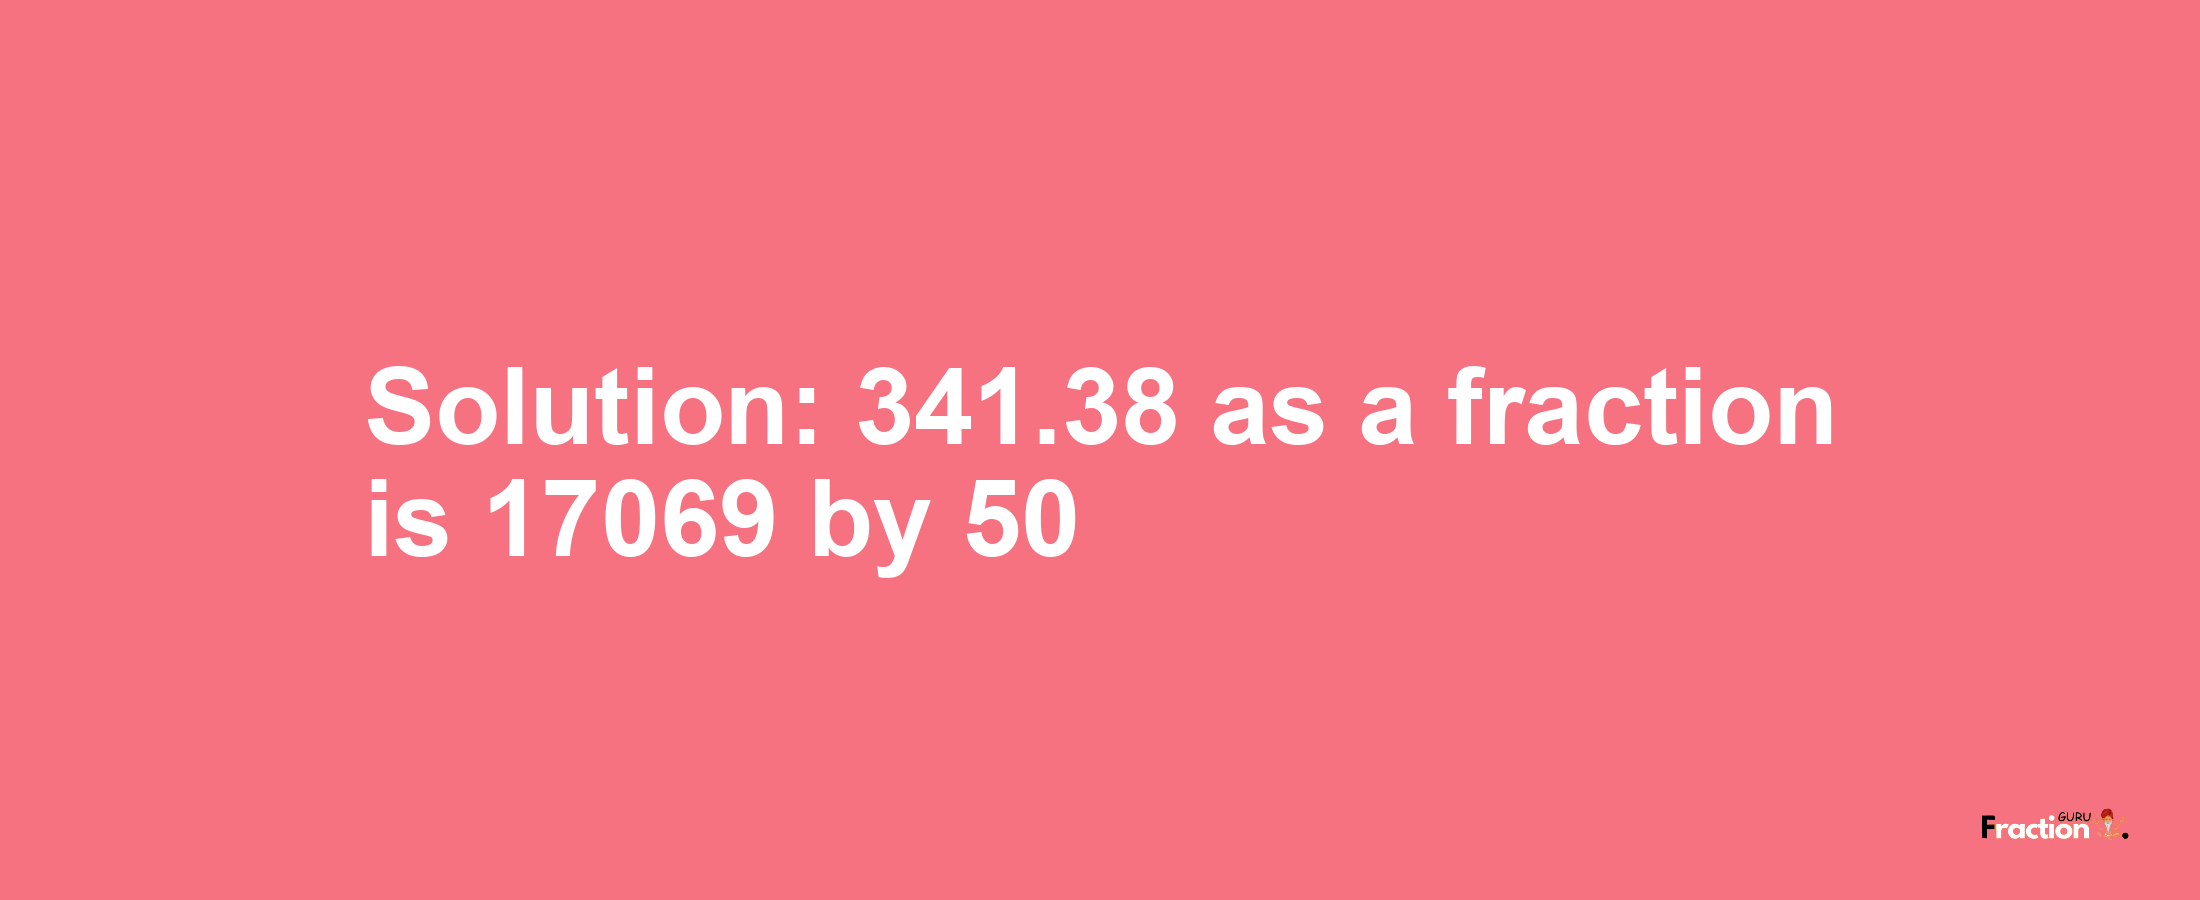 Solution:341.38 as a fraction is 17069/50